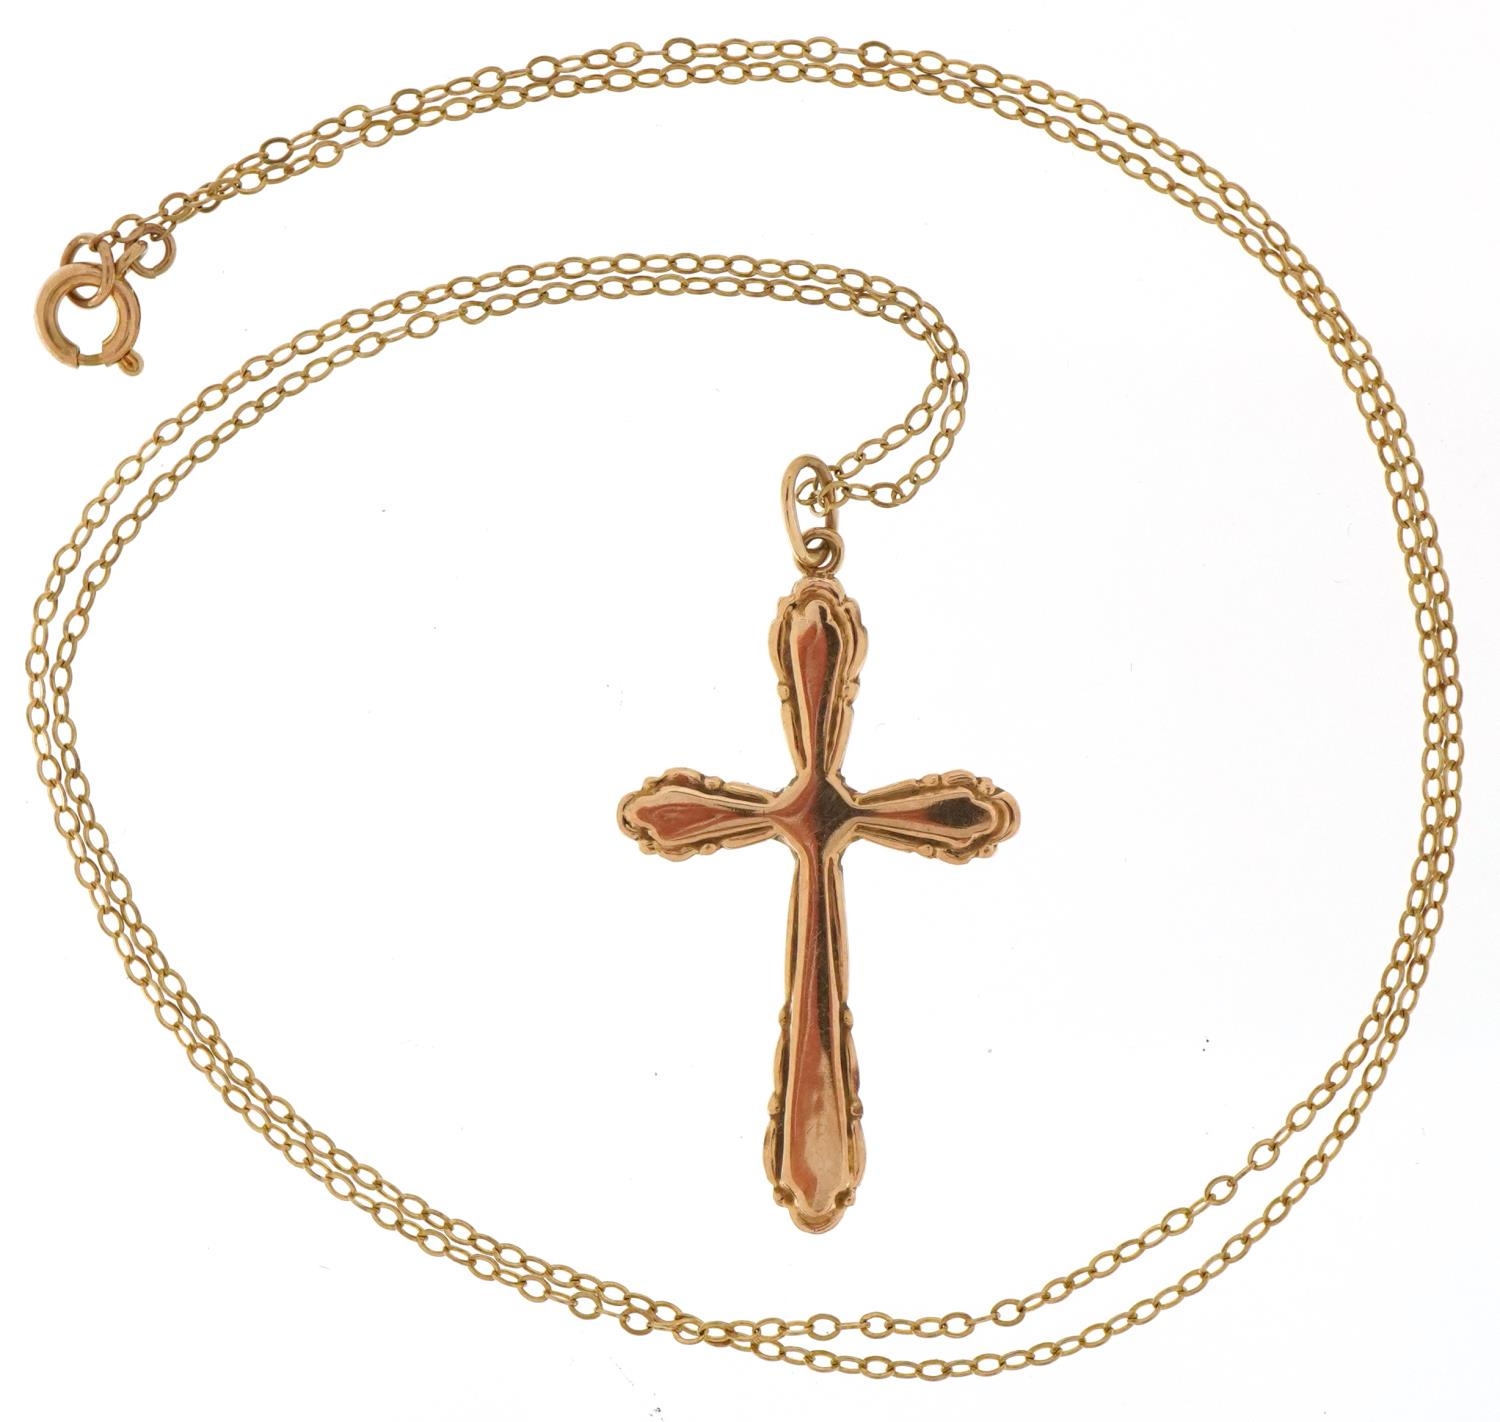 9ct gold cross pendant on a 9ct gold necklace, 3.5cm high and 48cm in length, total 1.7g - Image 2 of 3